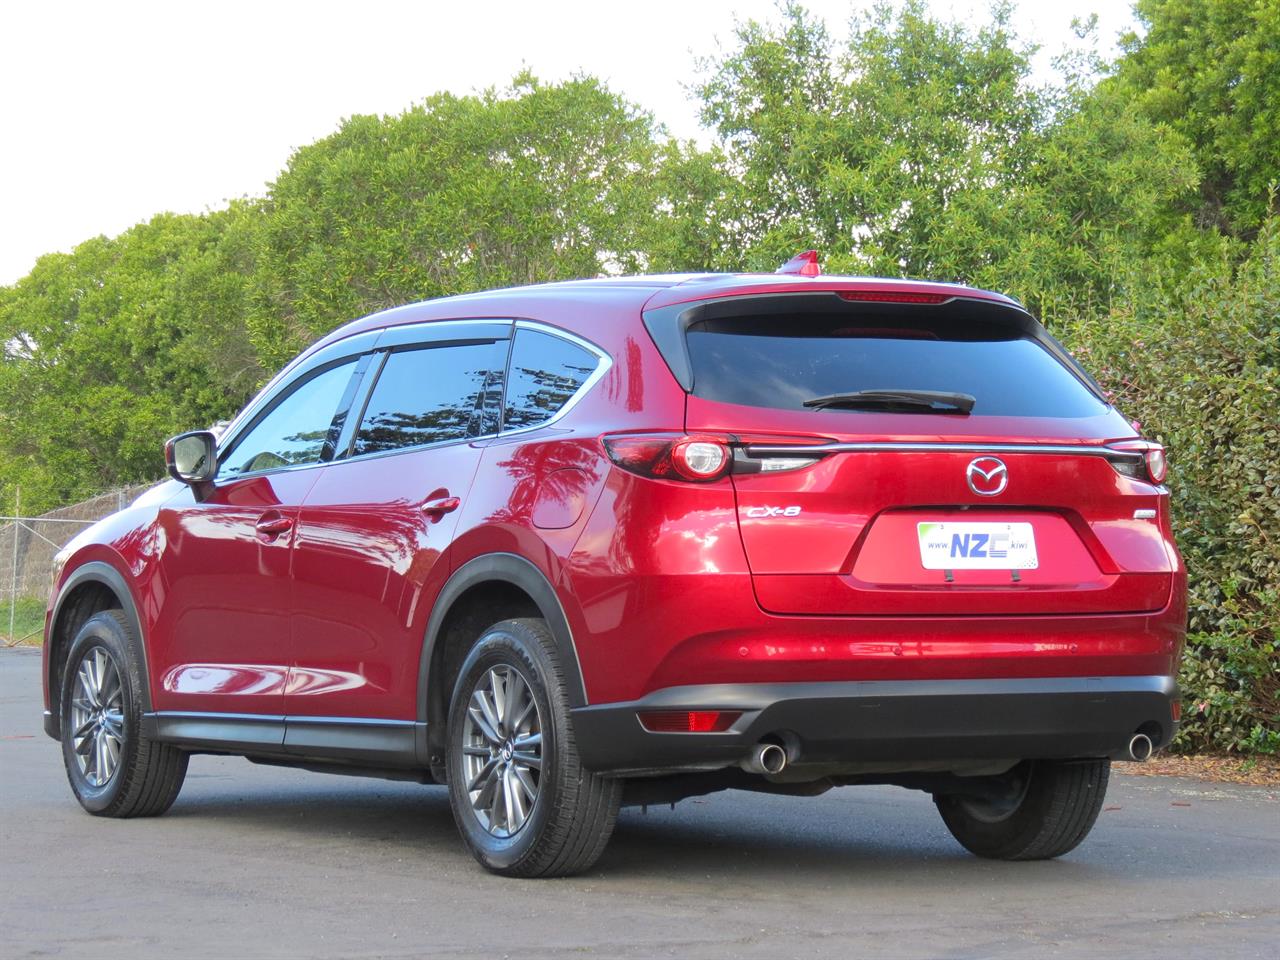 2018 Mazda CX-8 only $77 weekly